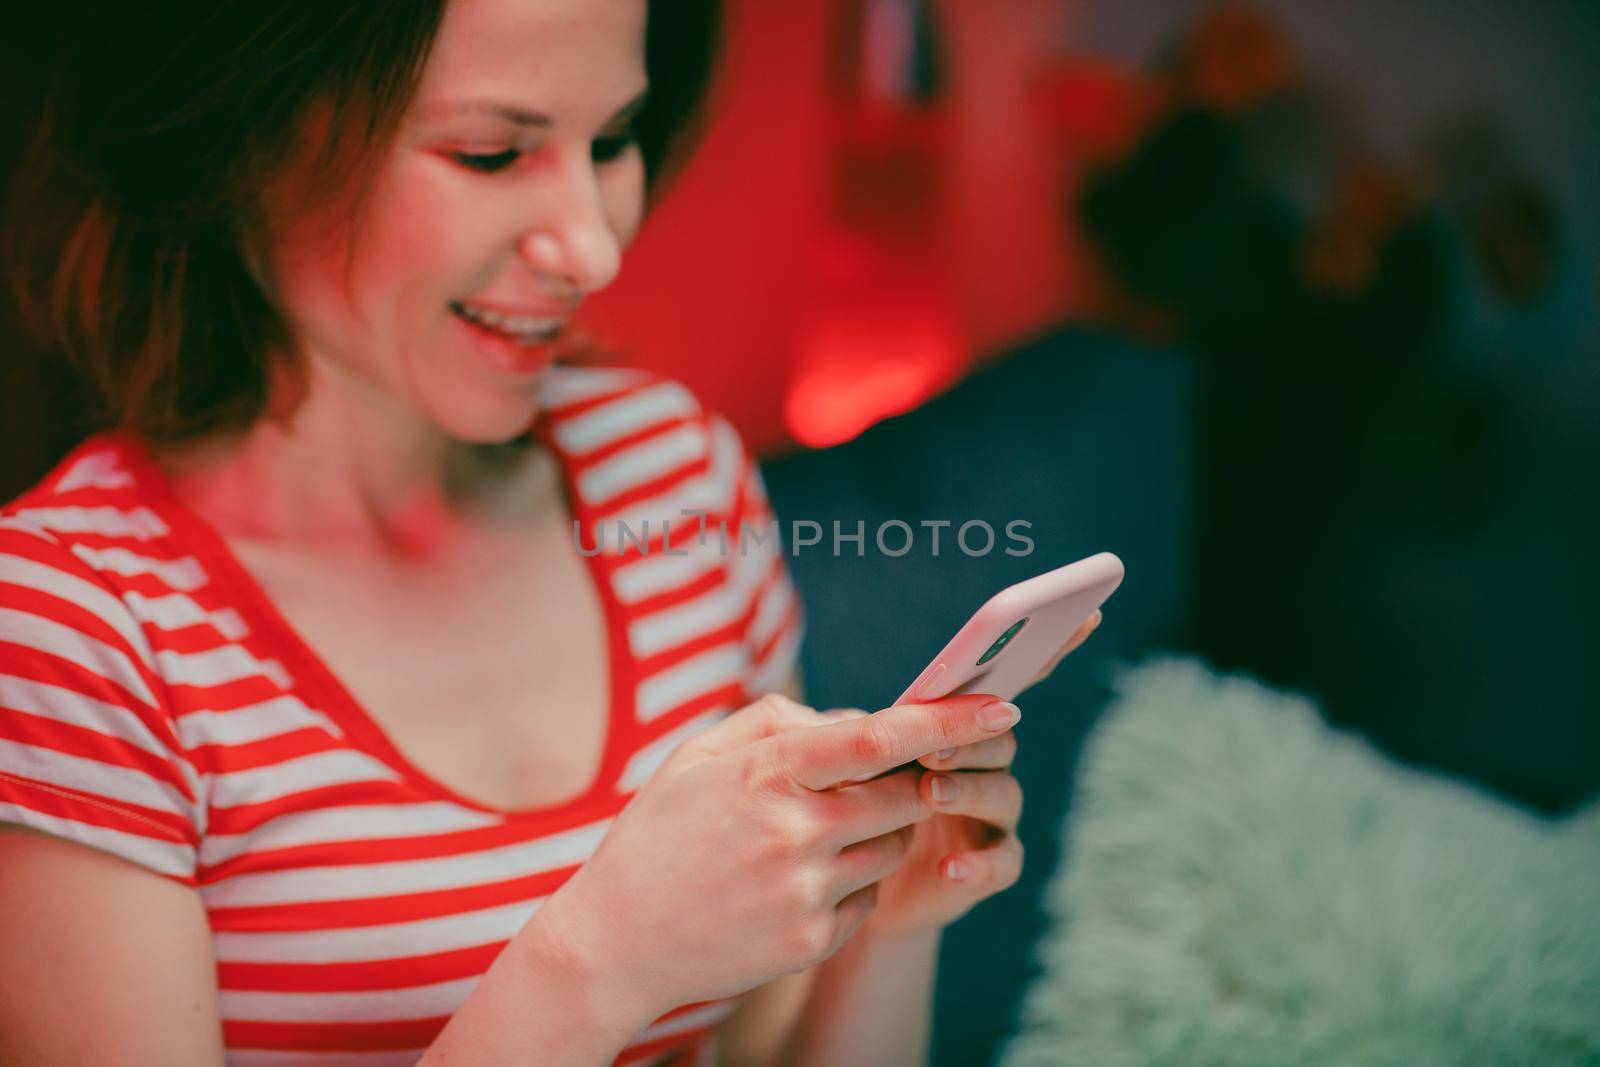 Happy Young Woman Holding Smart Phone Looking at Cellphone Screen Laughing Enjoying Using Mobile Apps for Shopping. Having Fun Playing Games Chatting in Social Media Sit on Couch at Home